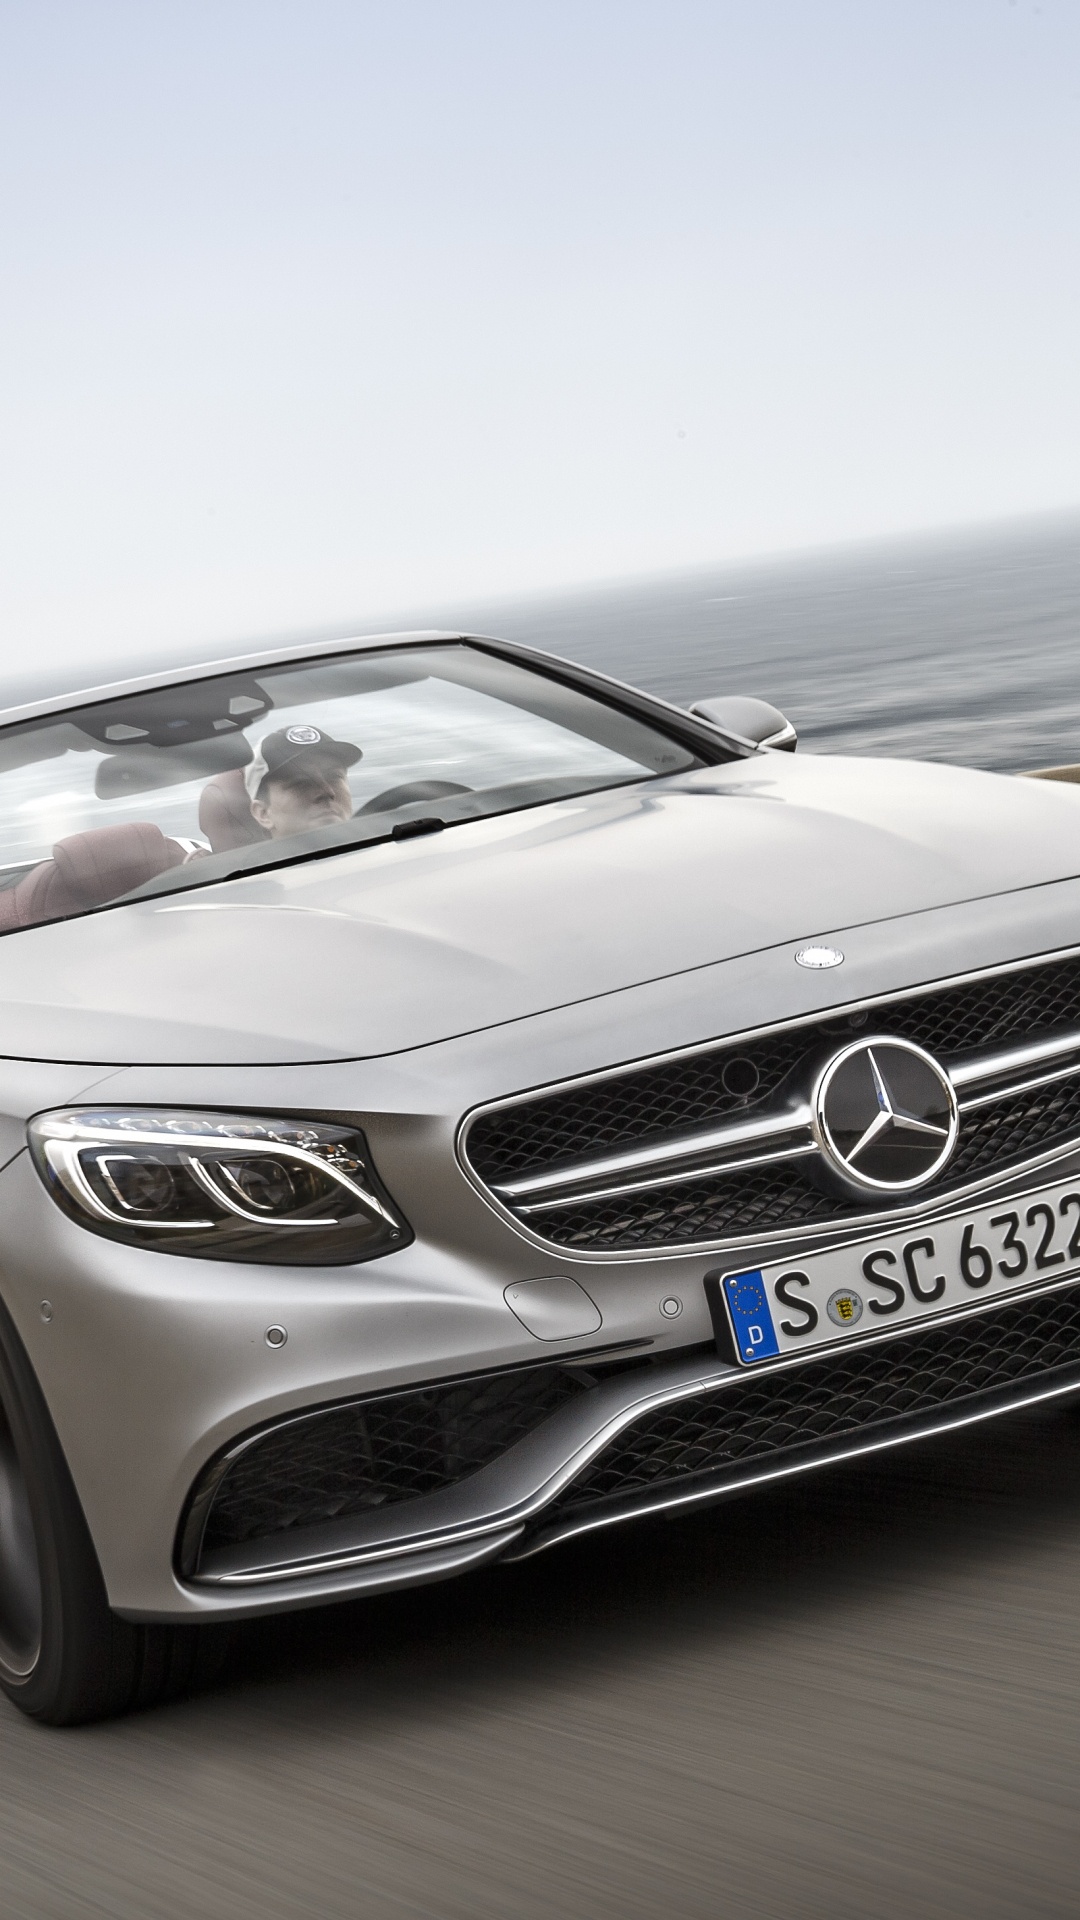 Gray Mercedes Benz Convertible Coupe on Road During Daytime. Wallpaper in 1080x1920 Resolution